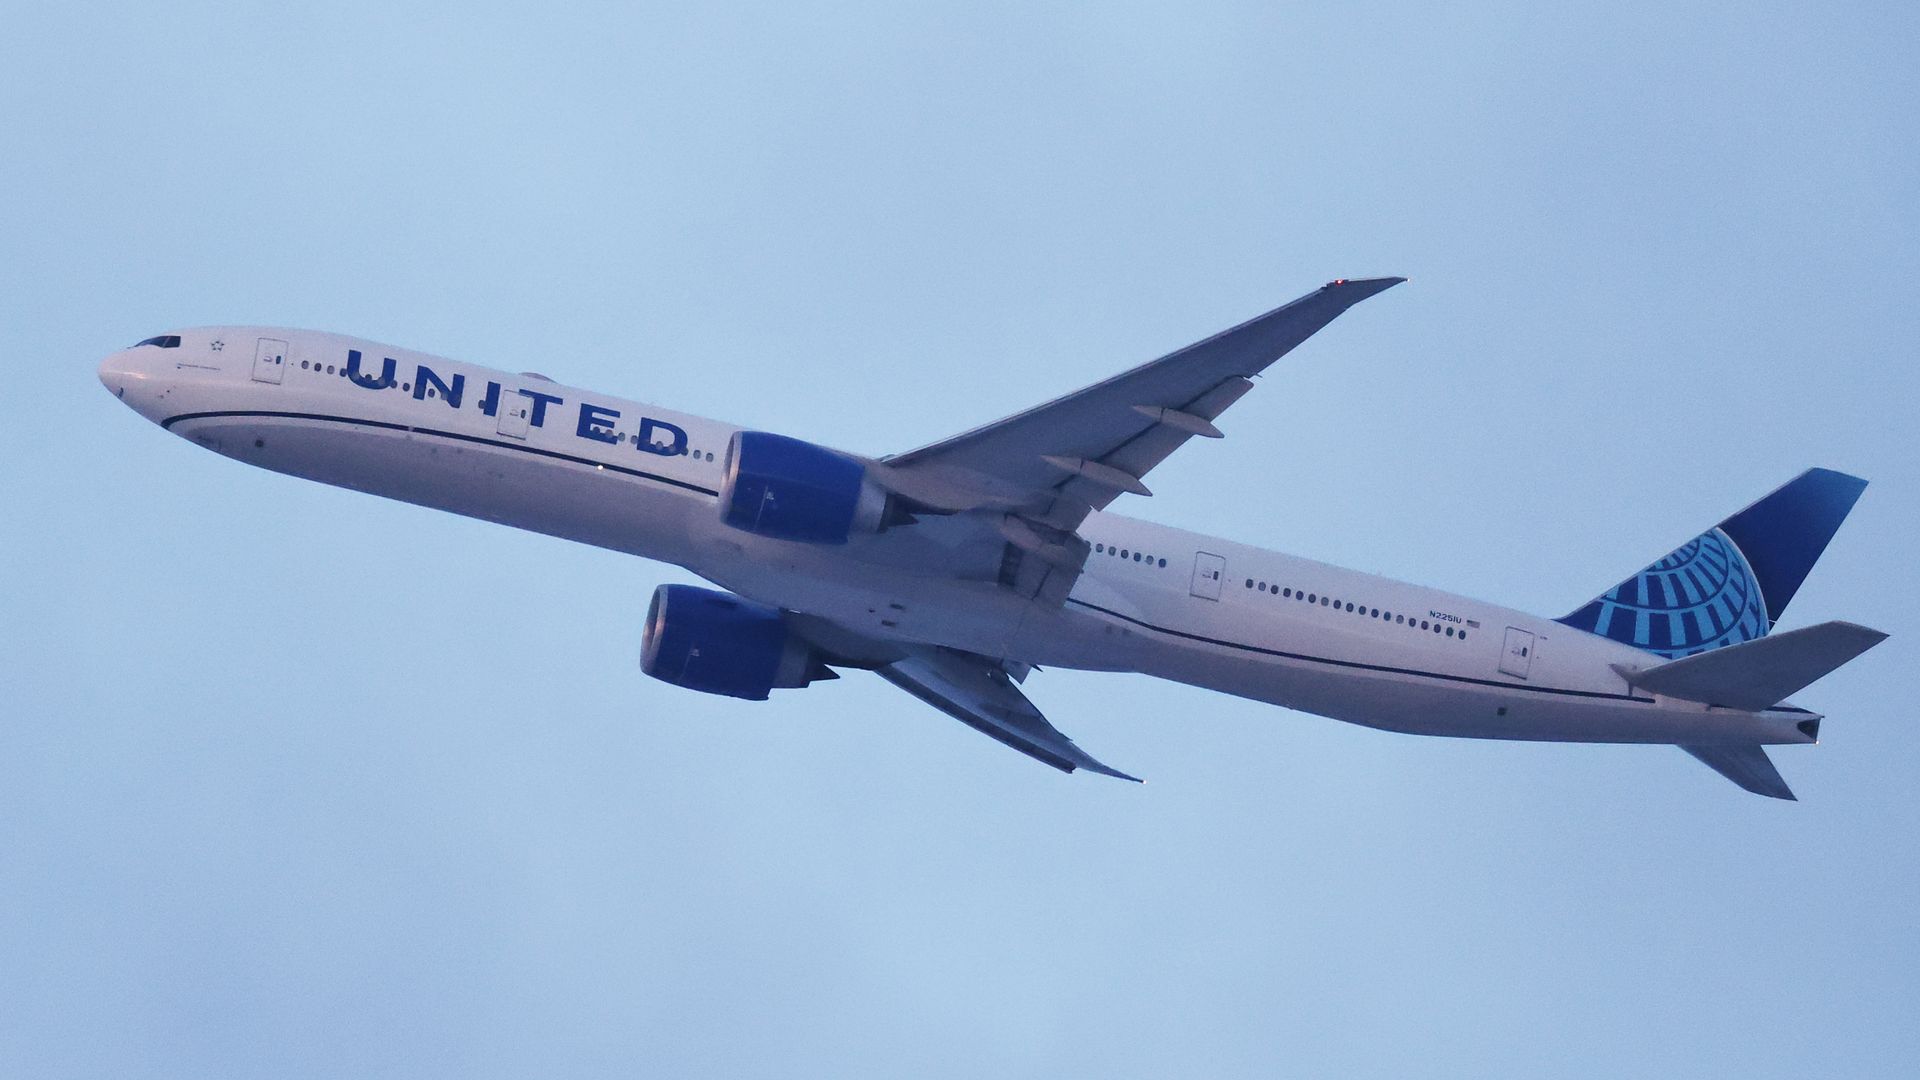 Picture of a plane with United Airlines logo